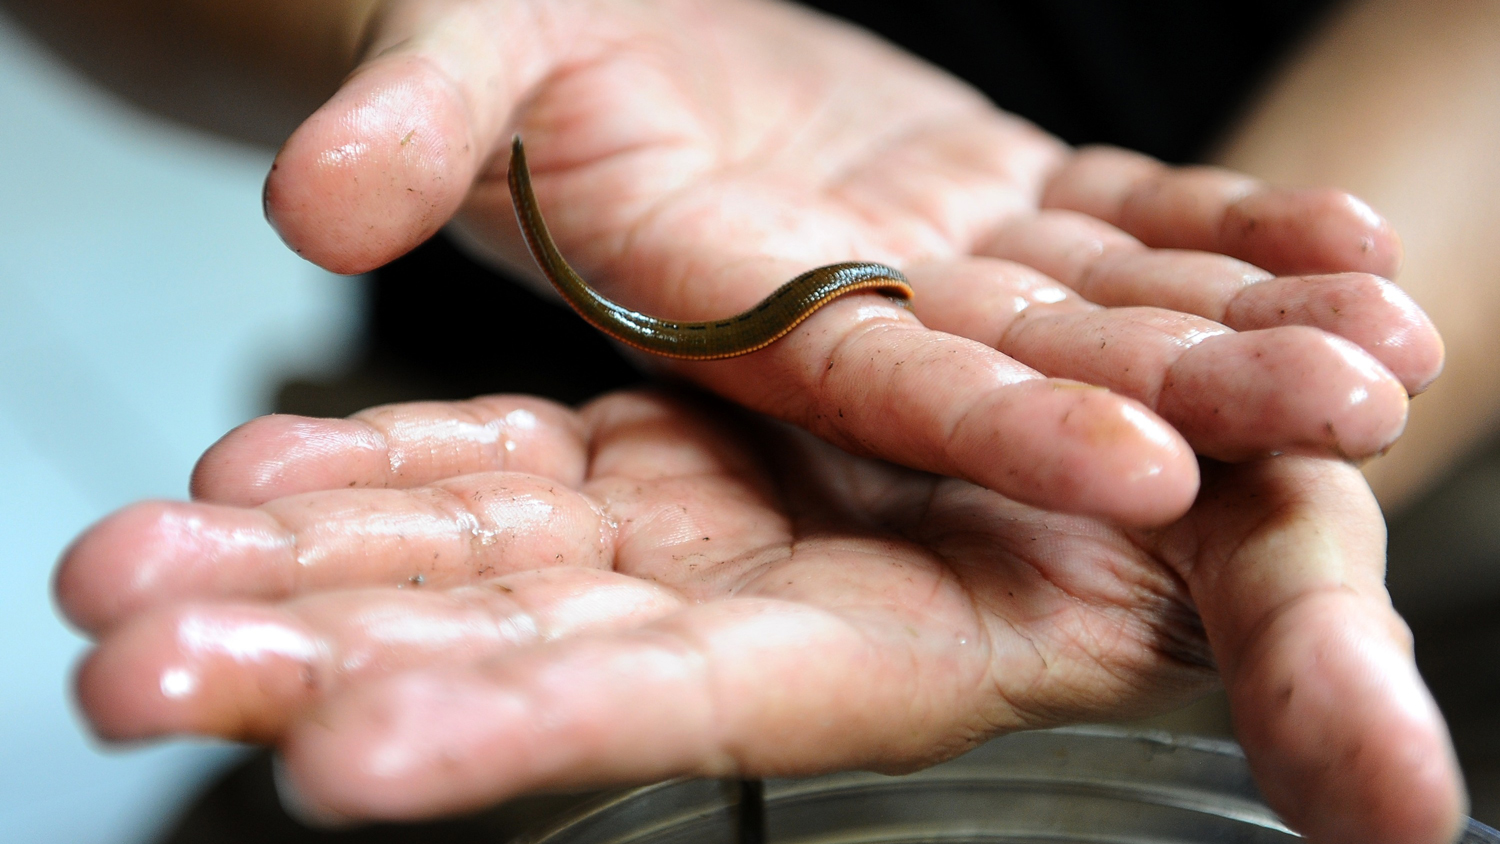 How to safely remove a leech (or avoid them altogether) - The Manual